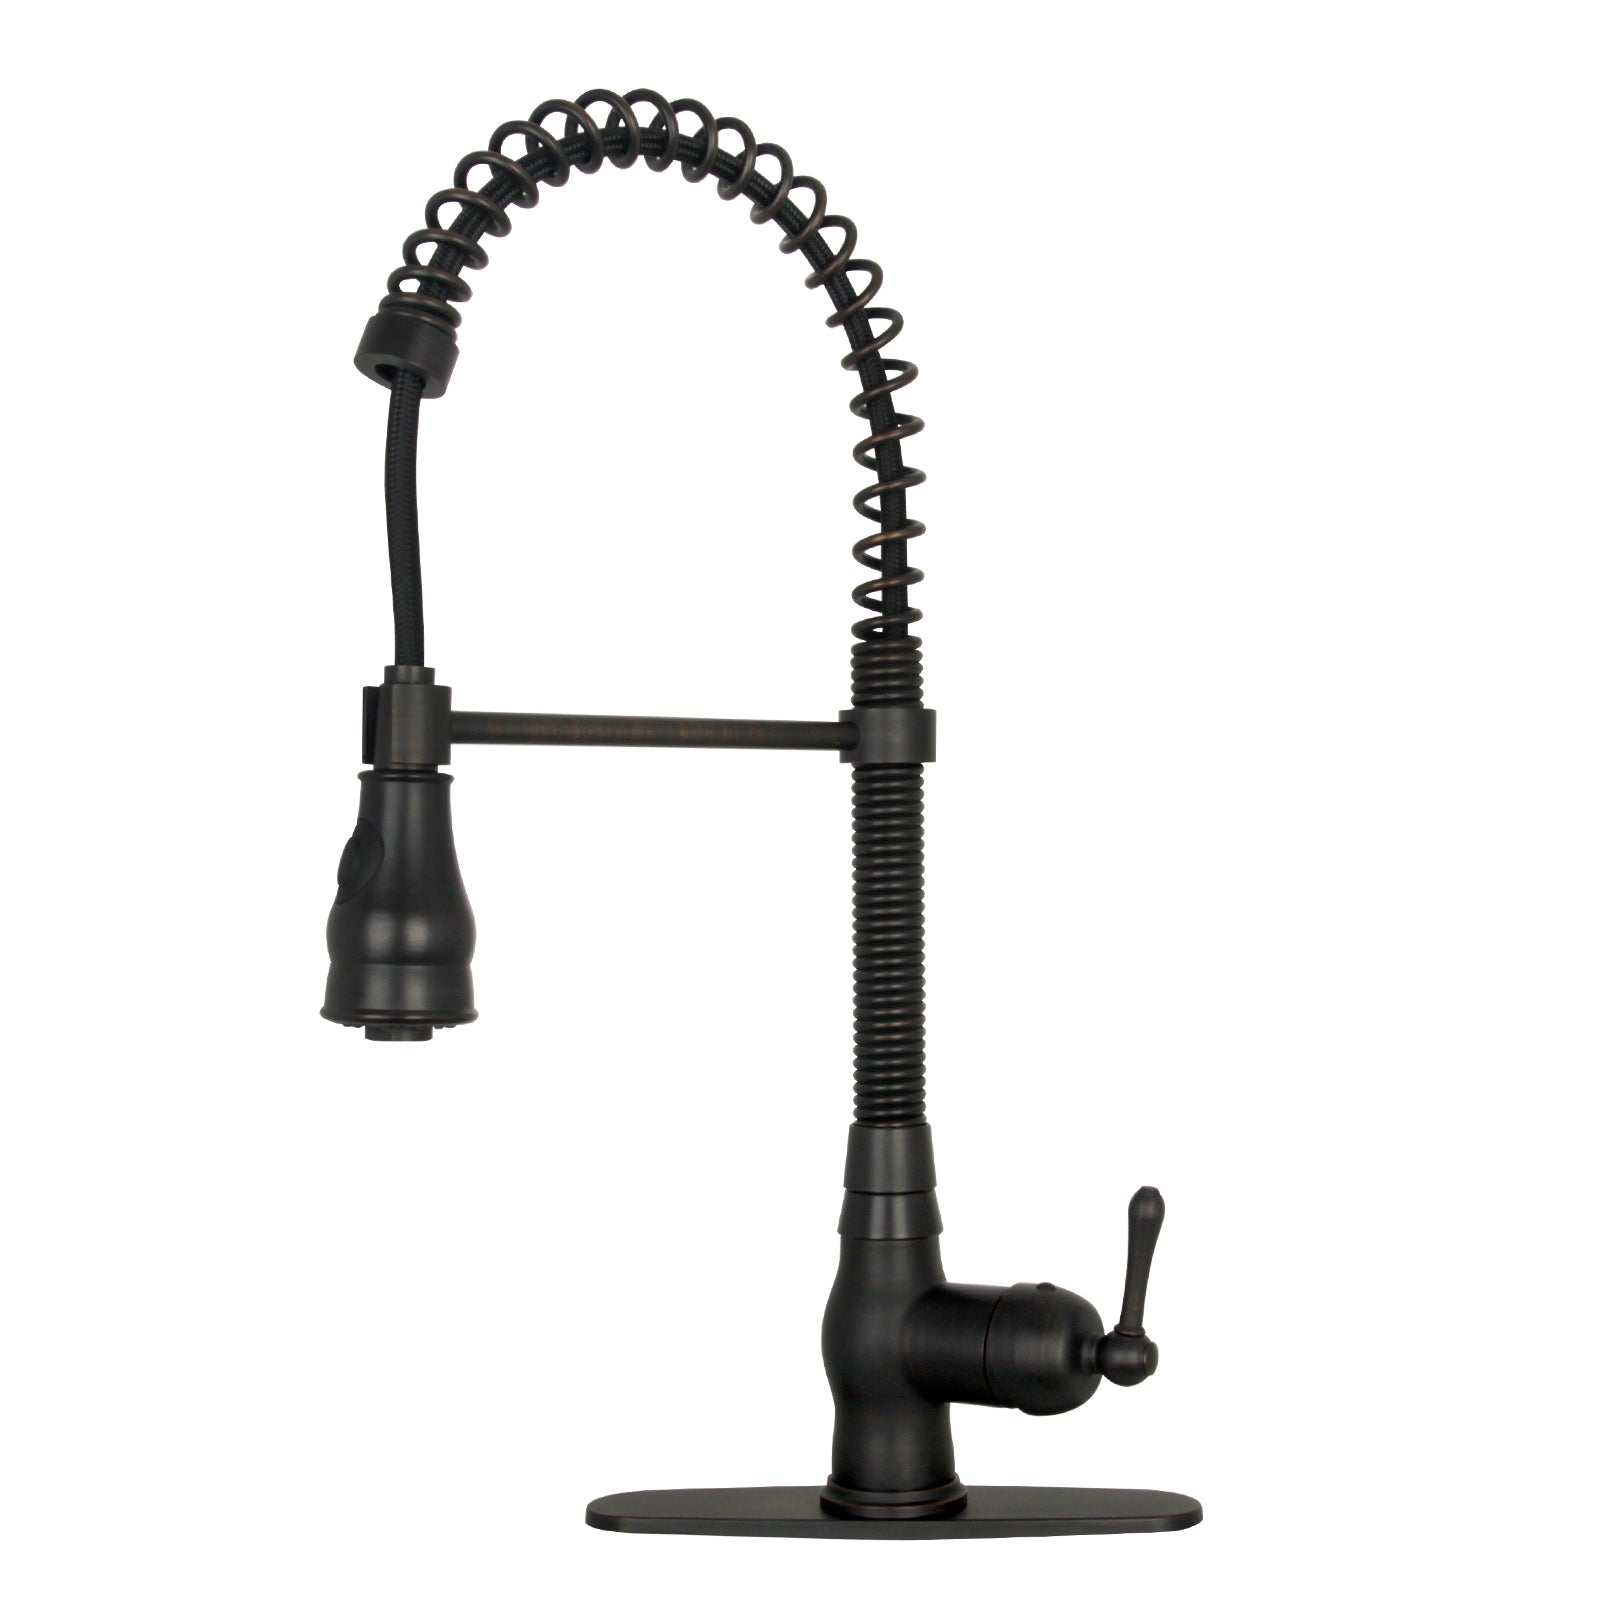 Oil Rubbed Bronze Pre-Rinse Spring Kitchen Faucet, Single Level Solid Brass Kitchen Sink Faucets with Pull Down Sprayer - AK96518A-ORB